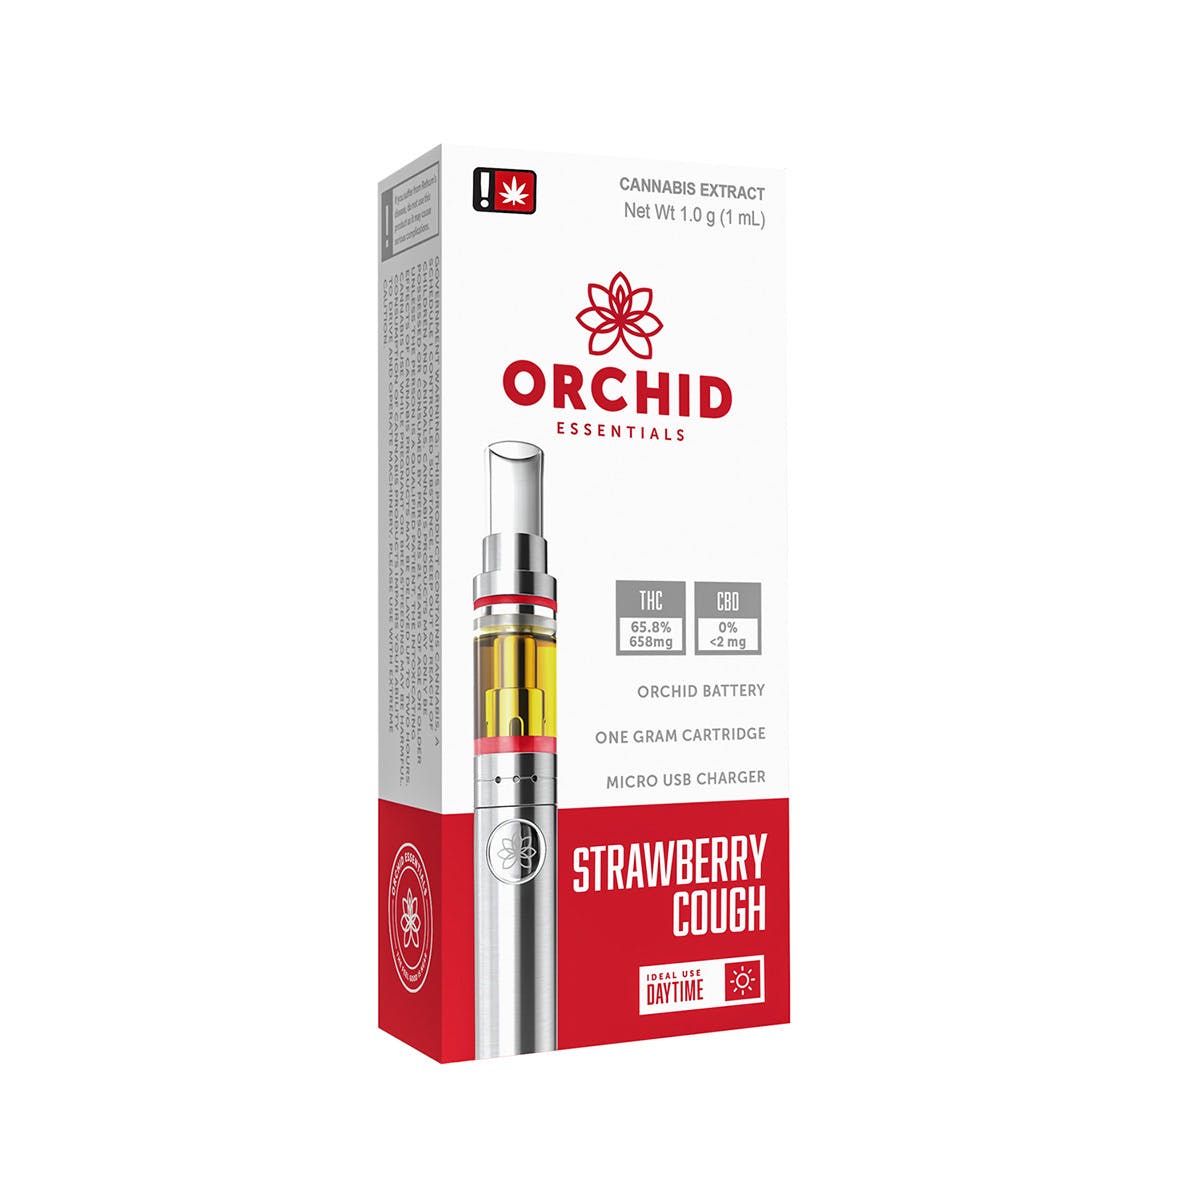 concentrate-orchid-essentials-strawberry-cough-1g-kit